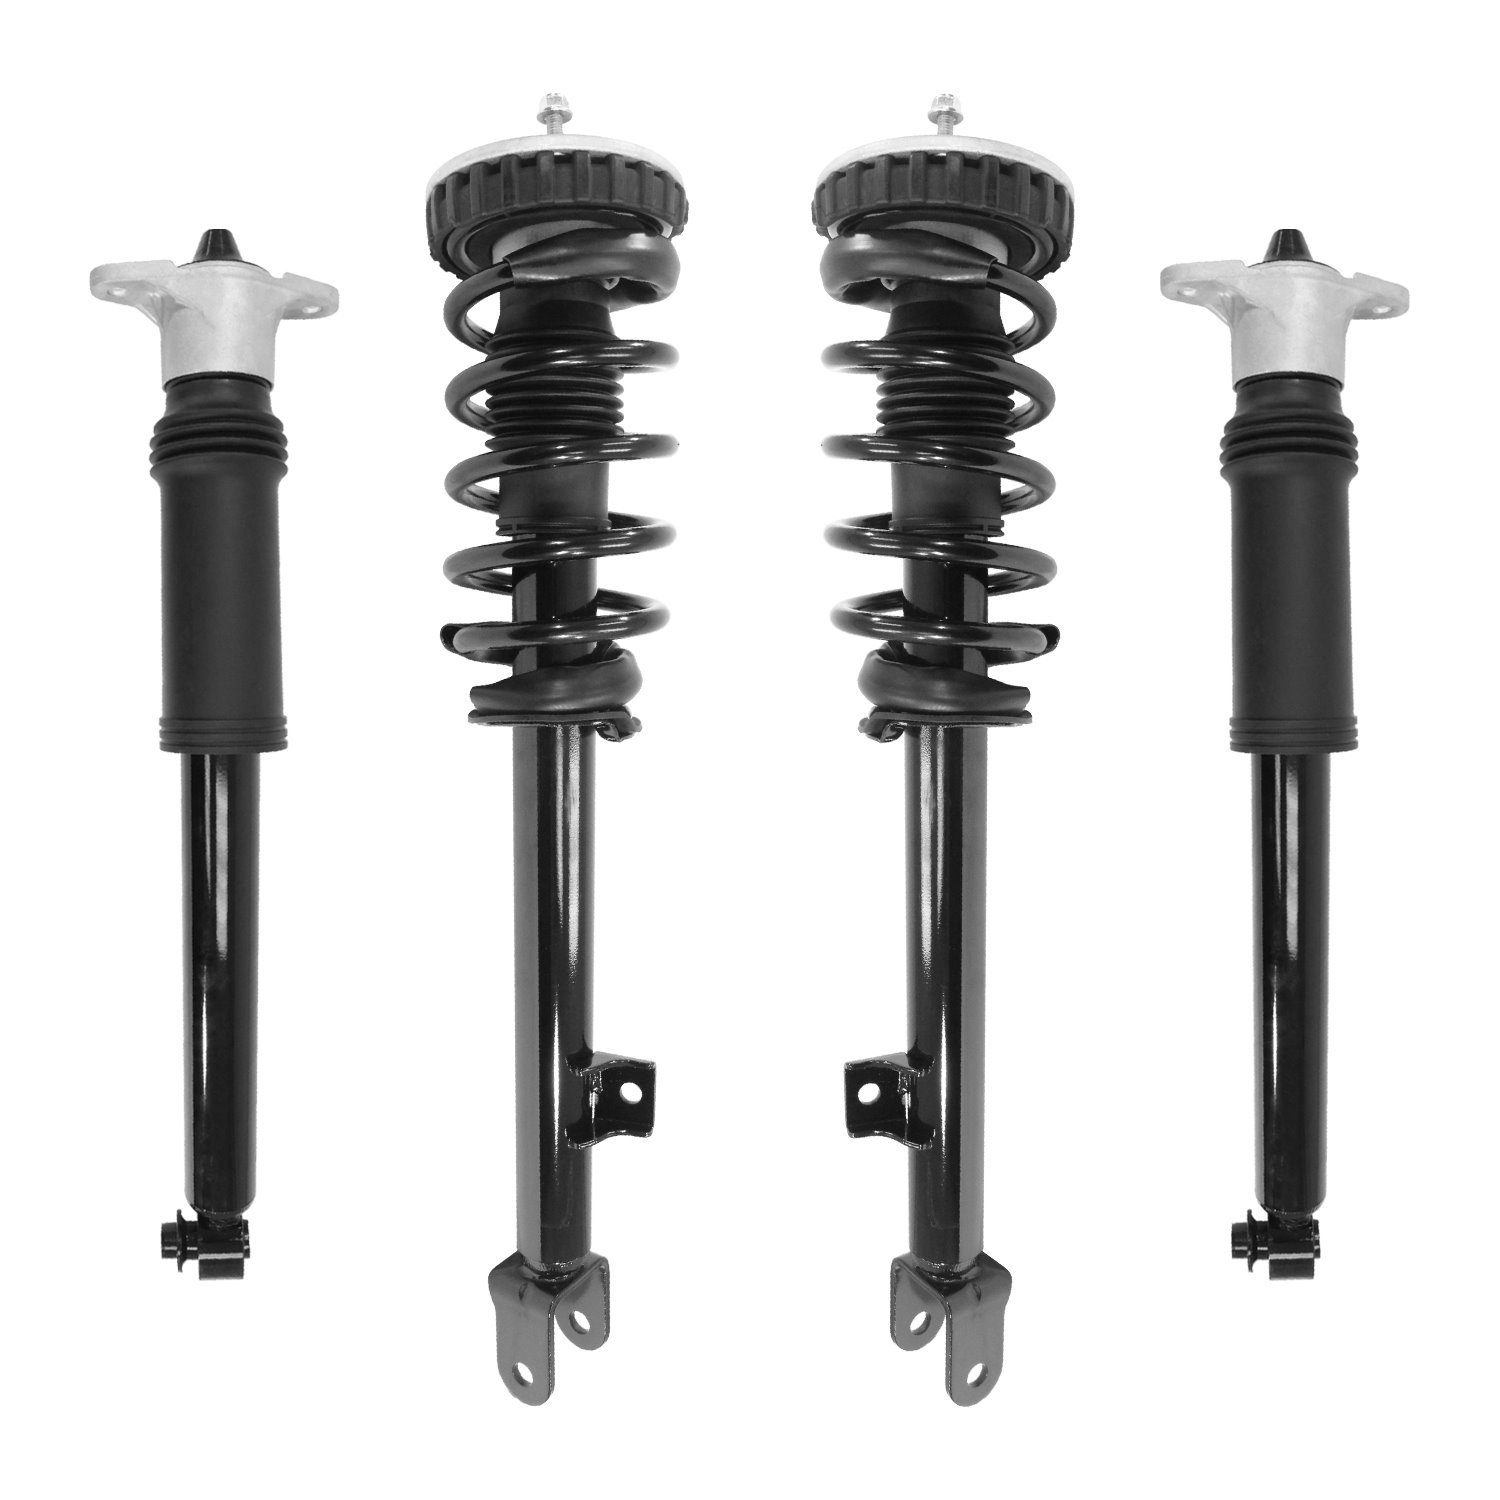 4-11165-259940-001 Front & Rear Suspension Strut & Coil Spring Assembly Fits Select Hyundai Genesis